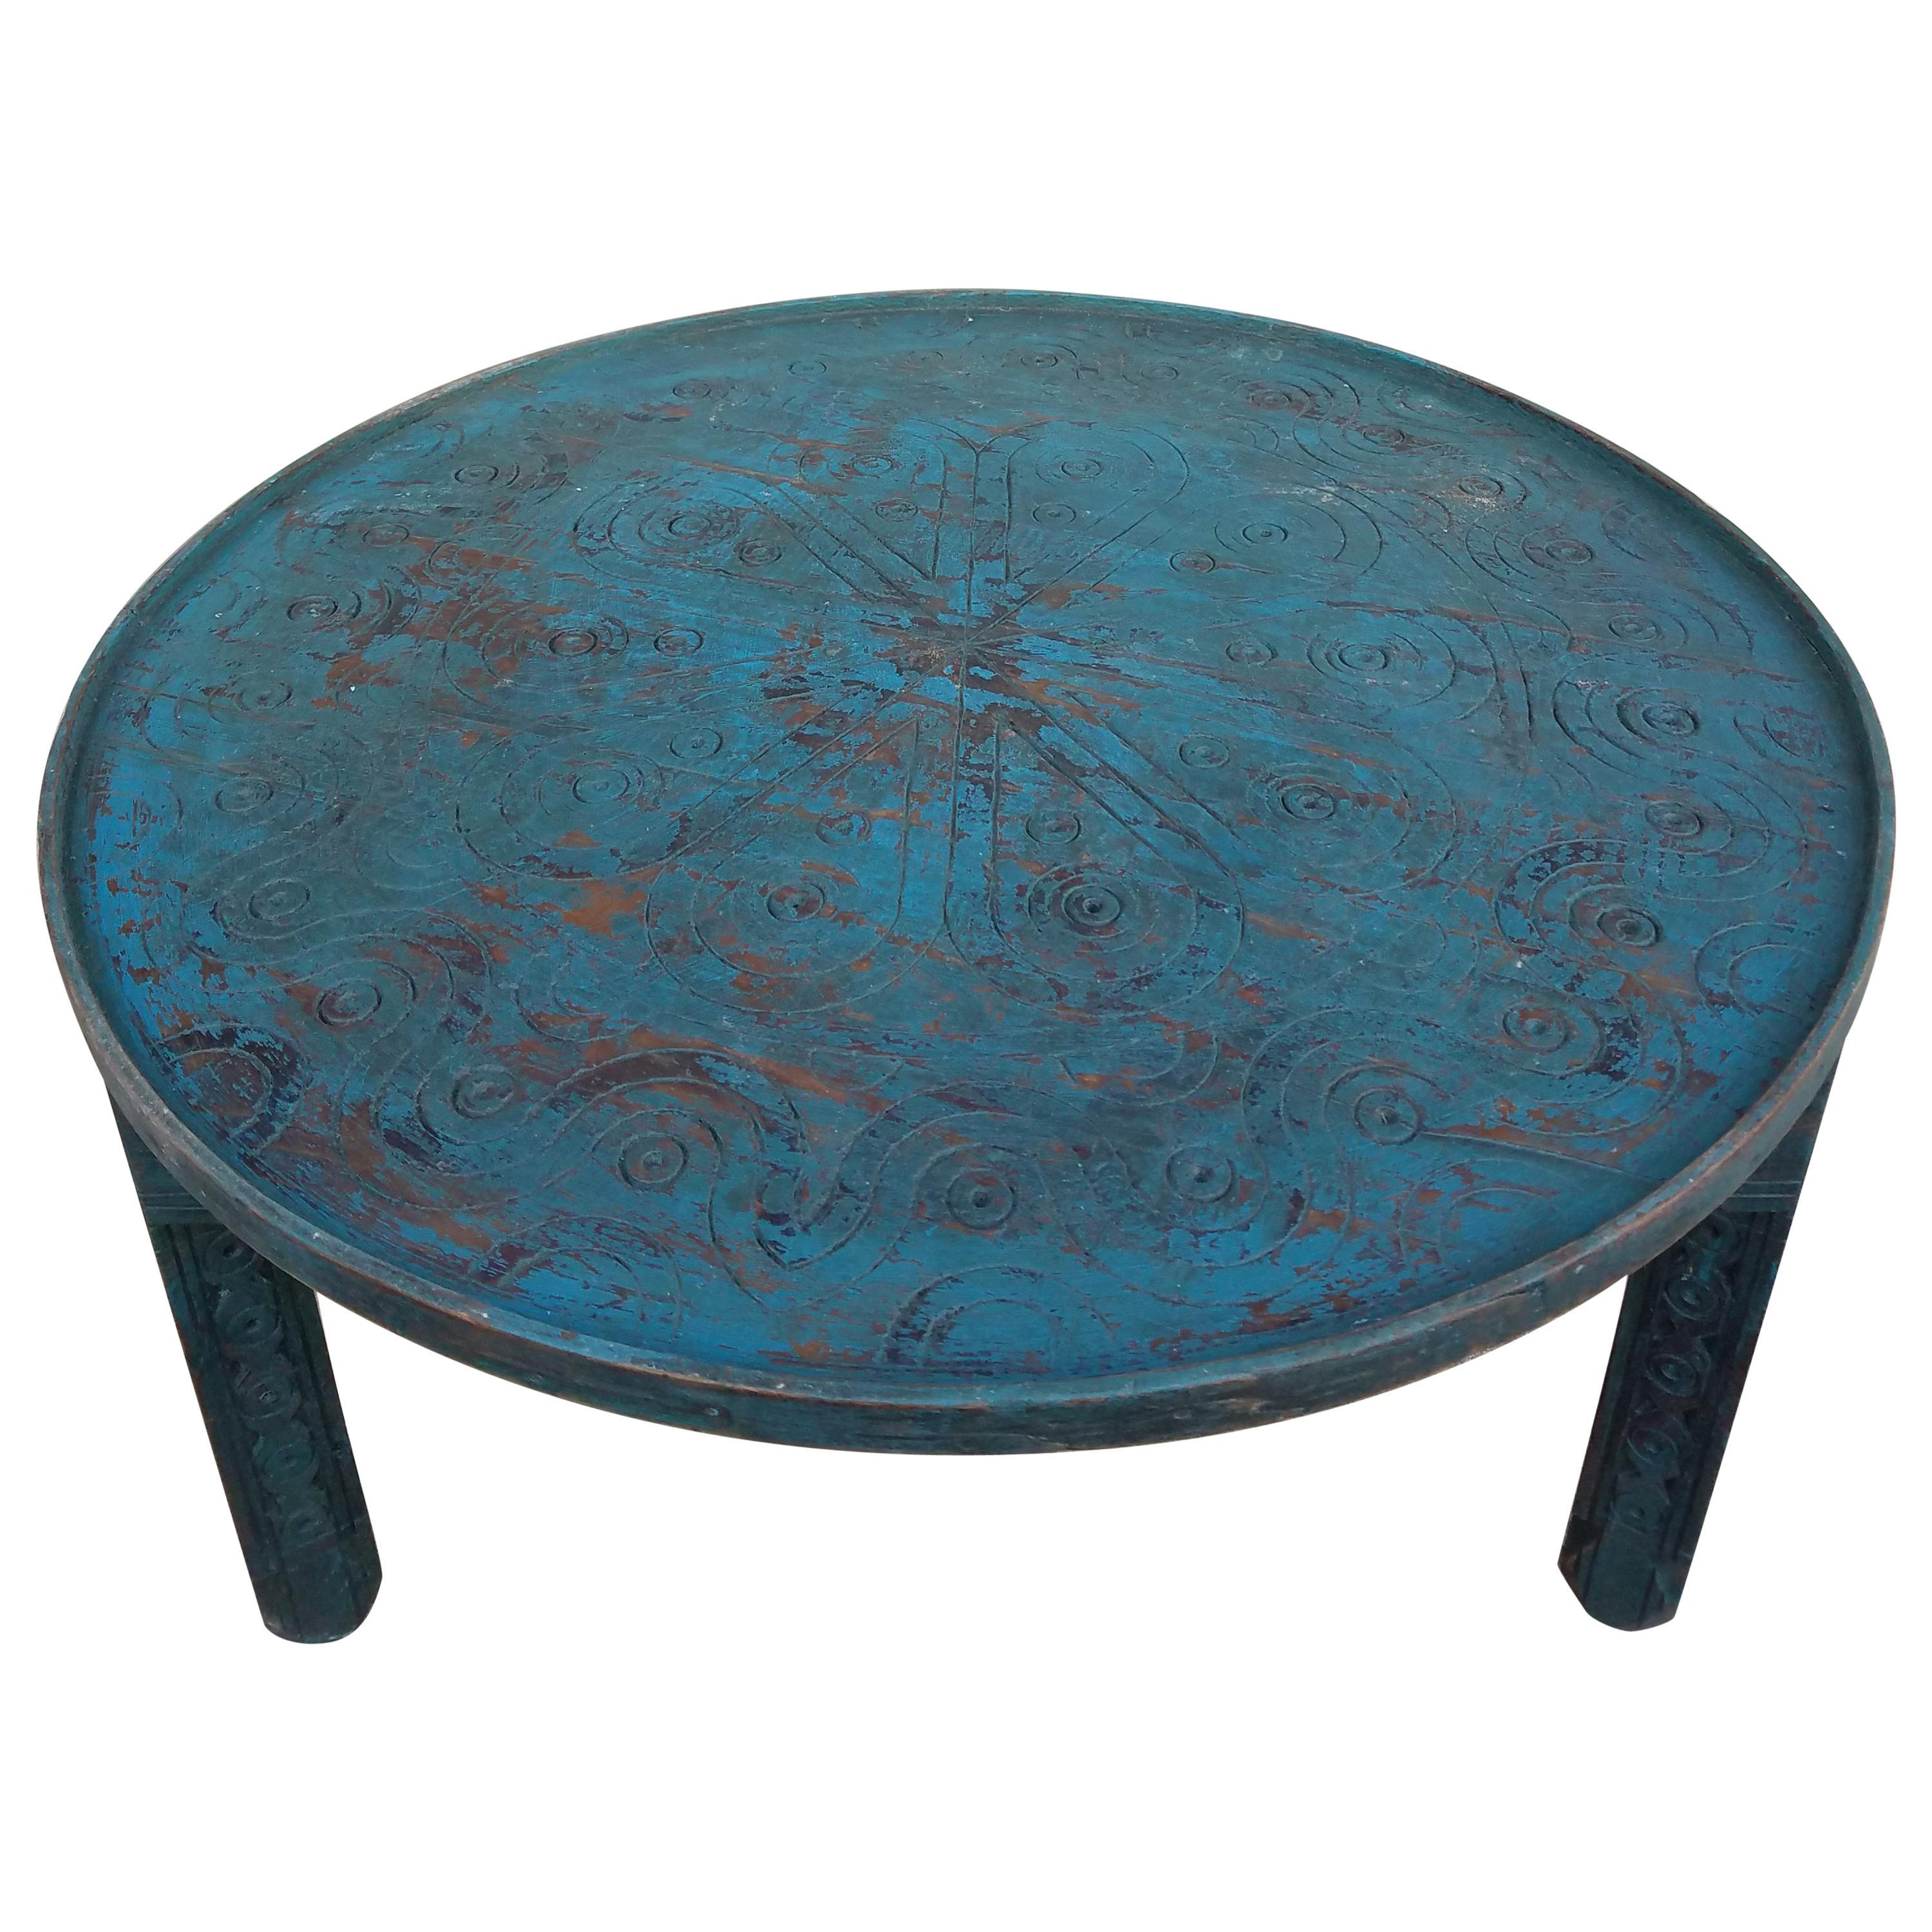 Moroccan Hand Carved Wooden Coffee Table, Turquoise Round